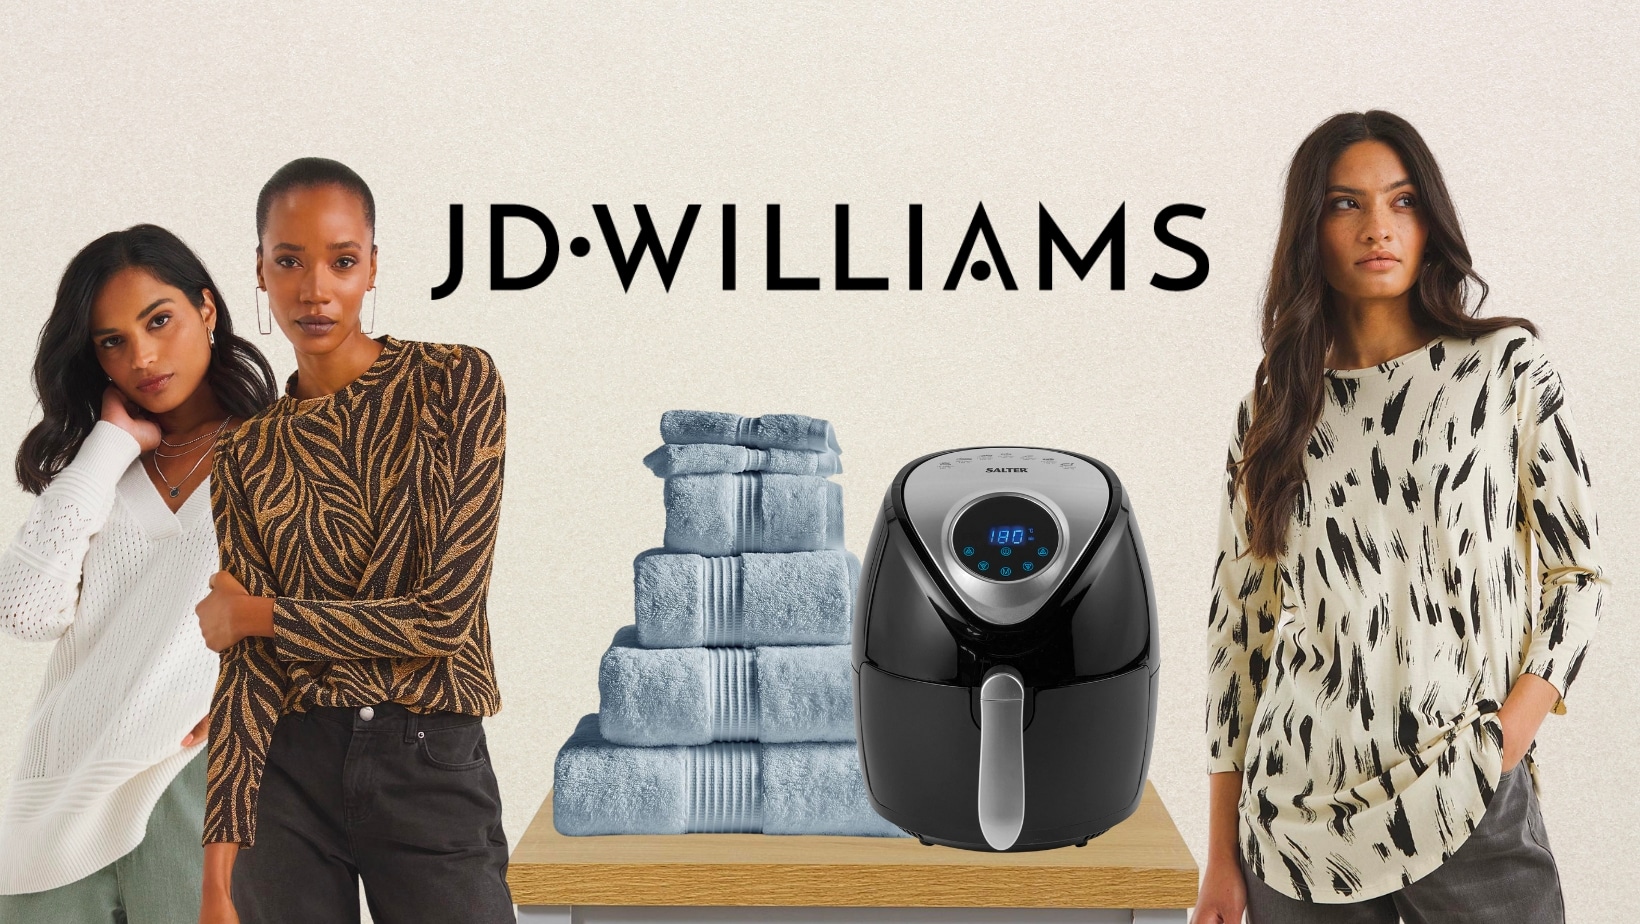 JD Williams: Who are they and what do they offer